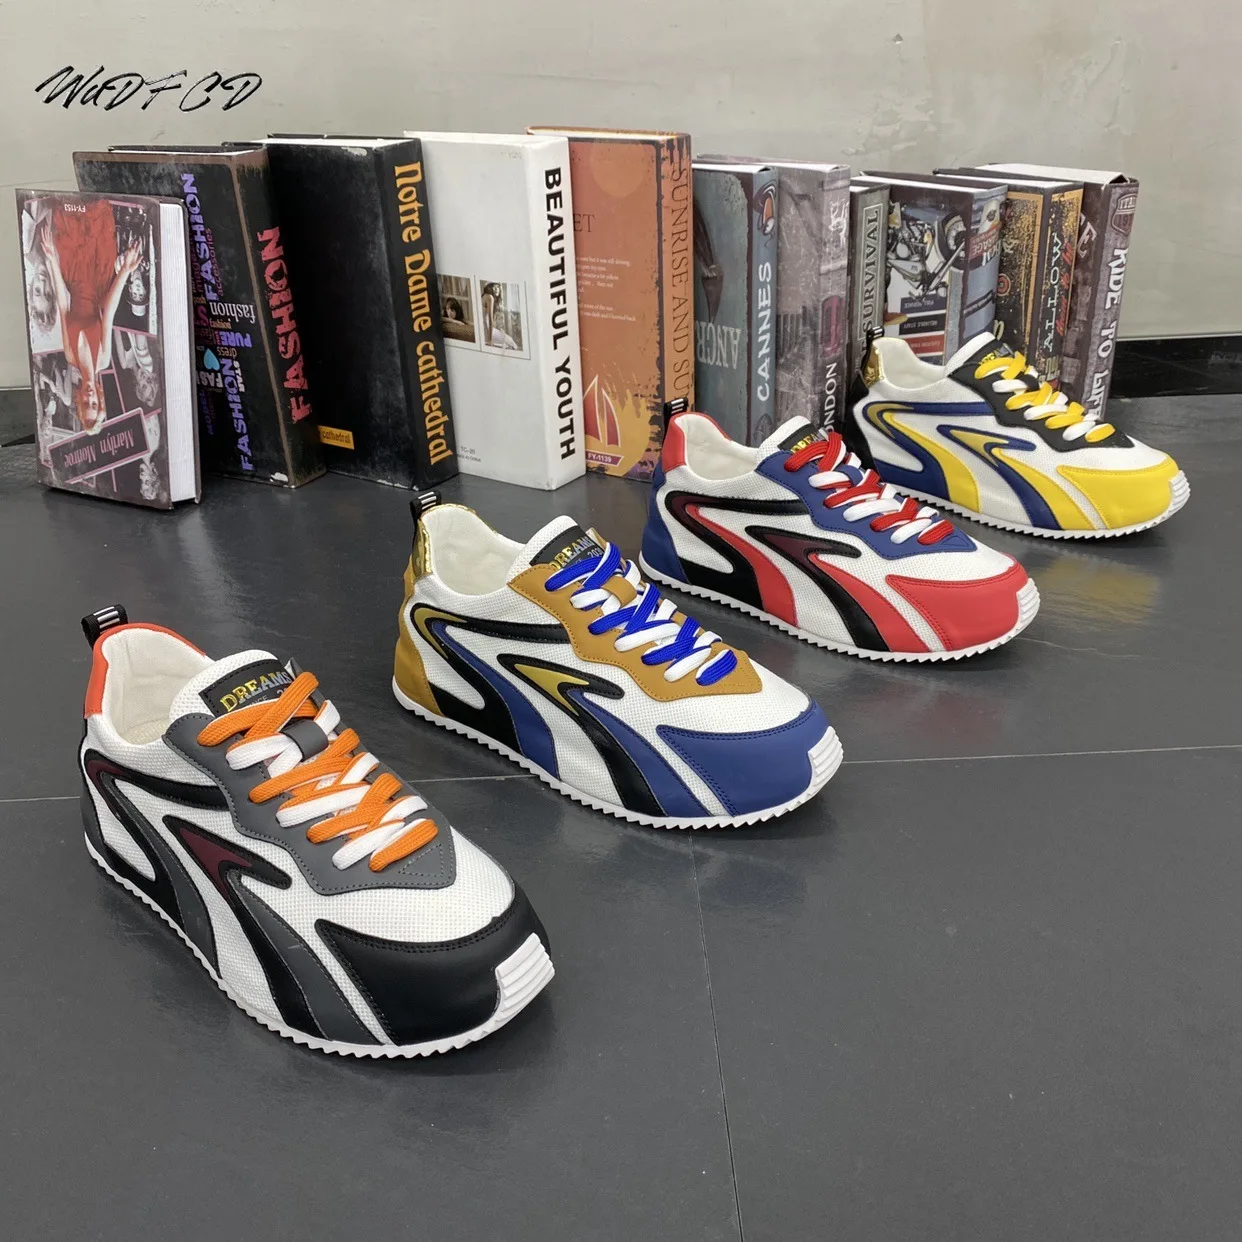 

Mens Cover Bottom Sneakers Casual Fashion Mesh Breathable Increased Internal Platform Shoes Trend Cool Mixed Colors Board Shoes